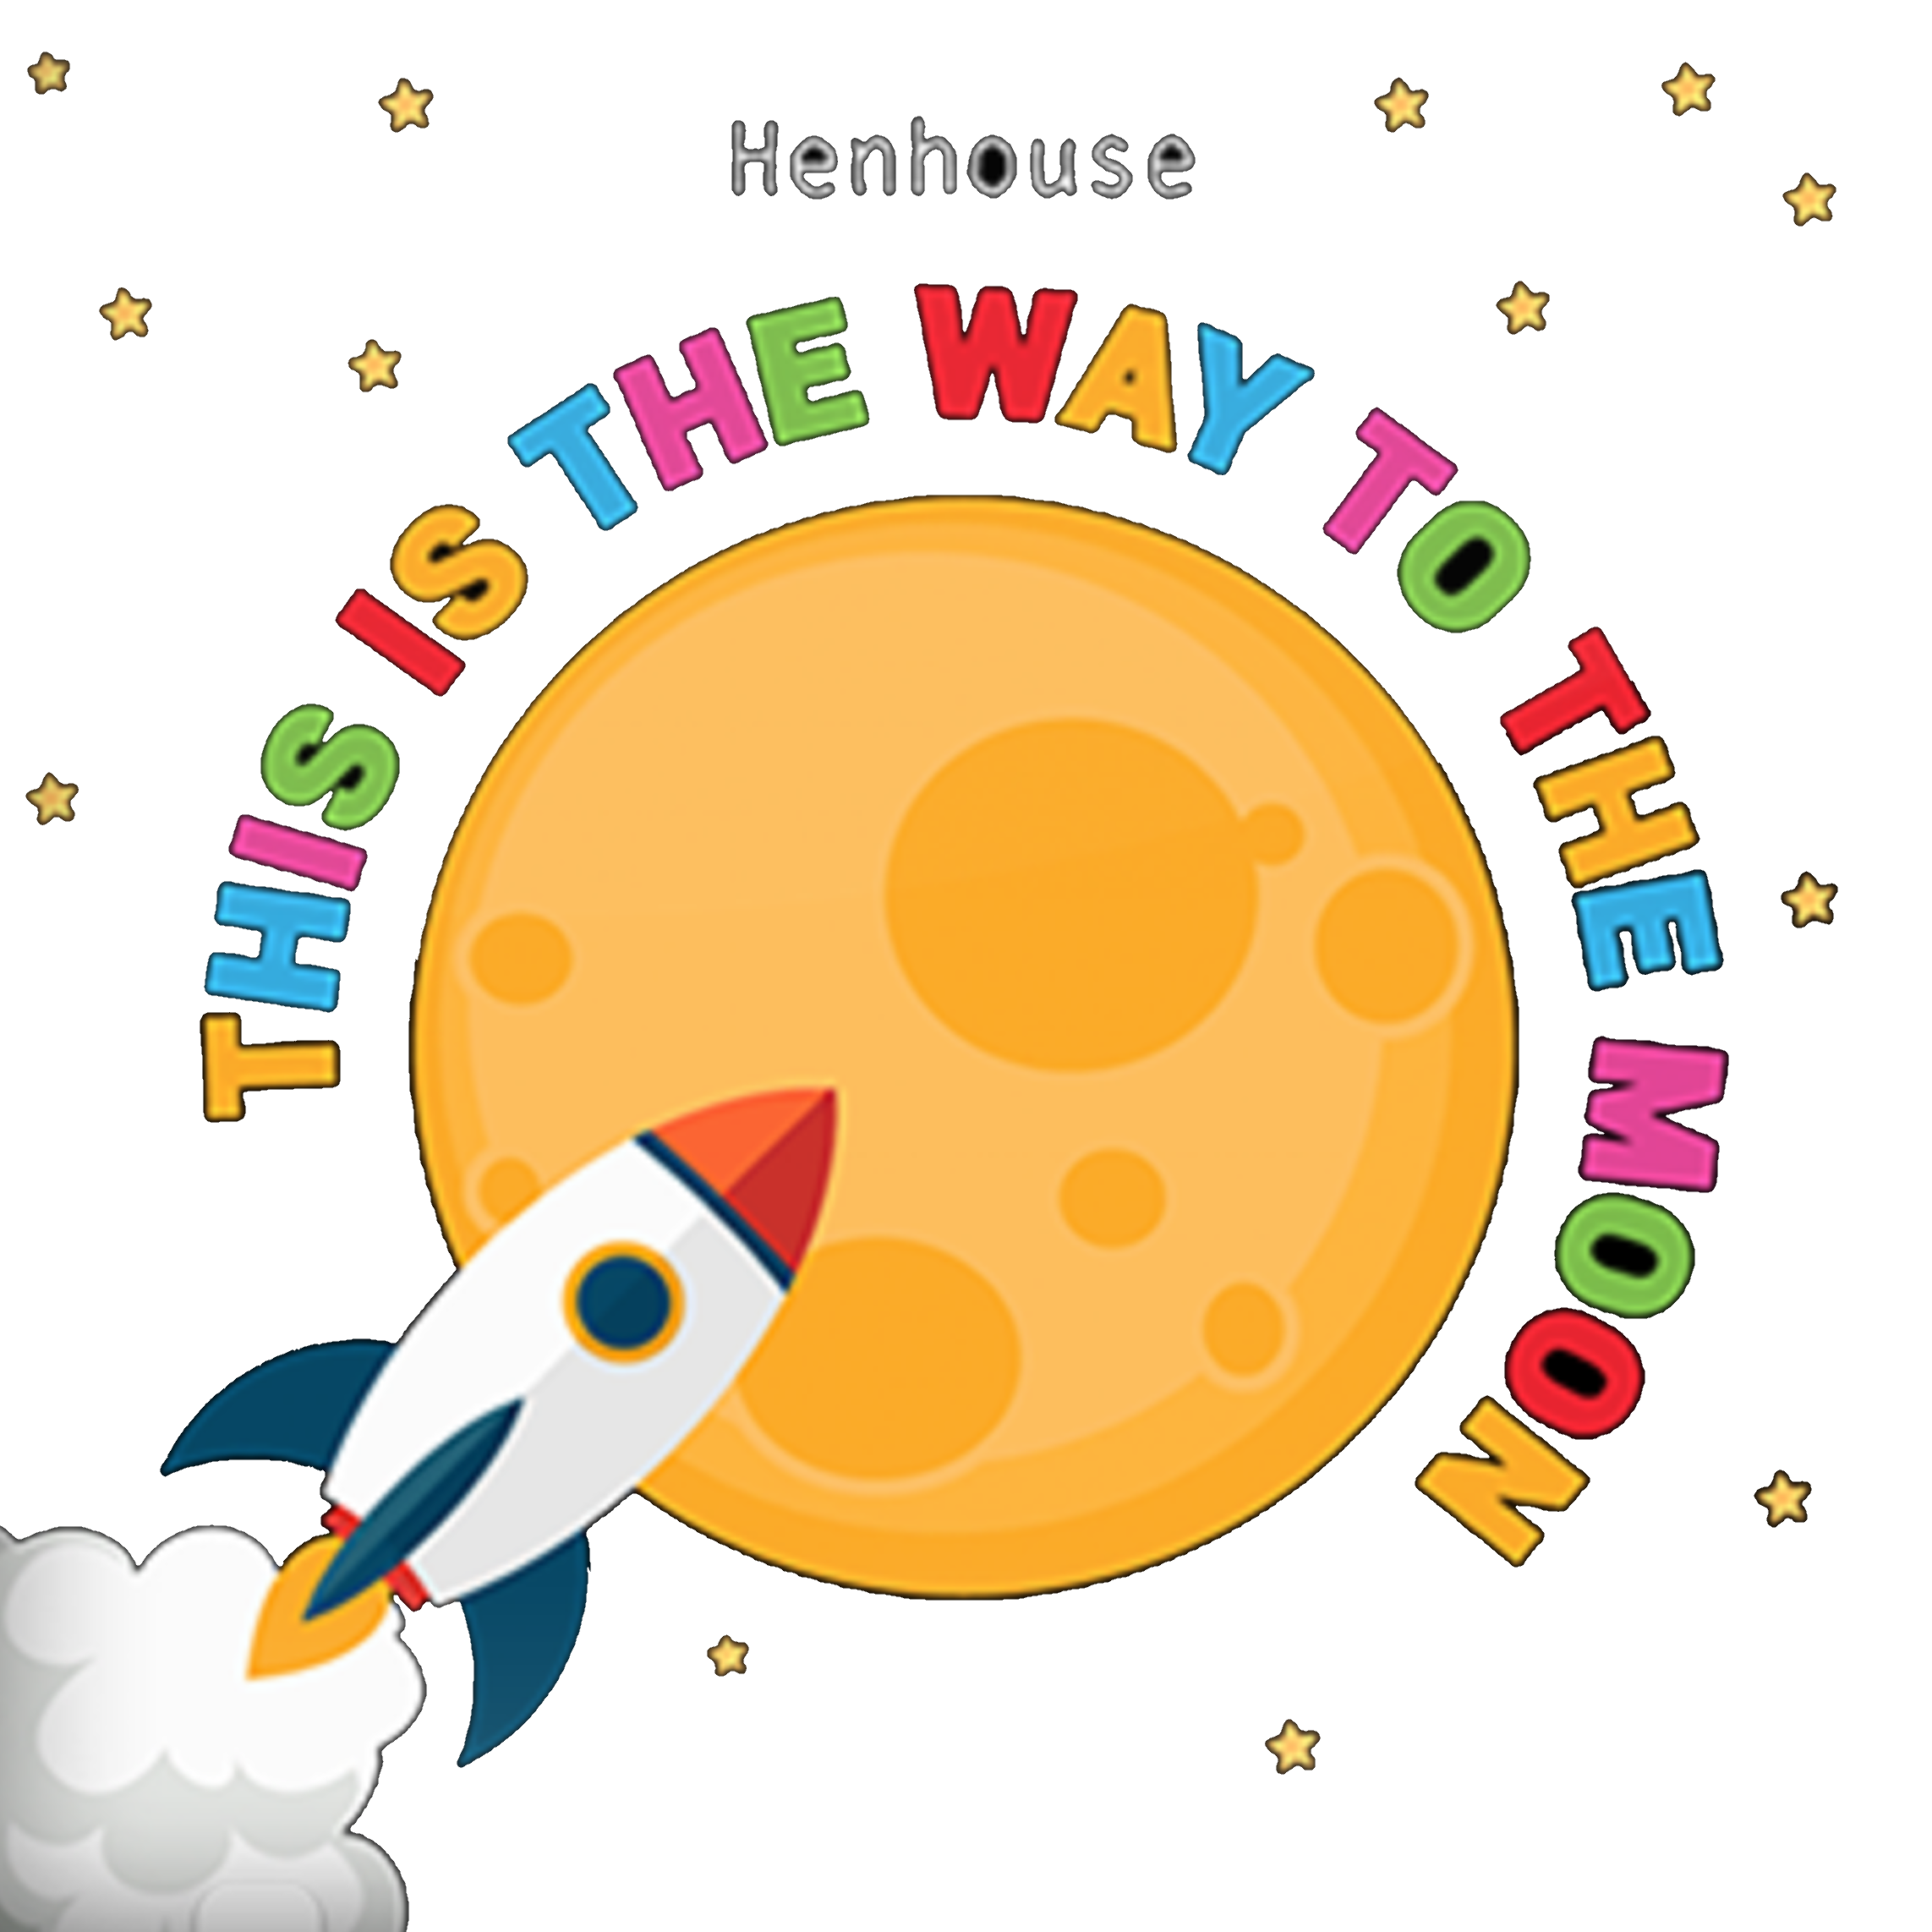 This is the way to the moon album cover